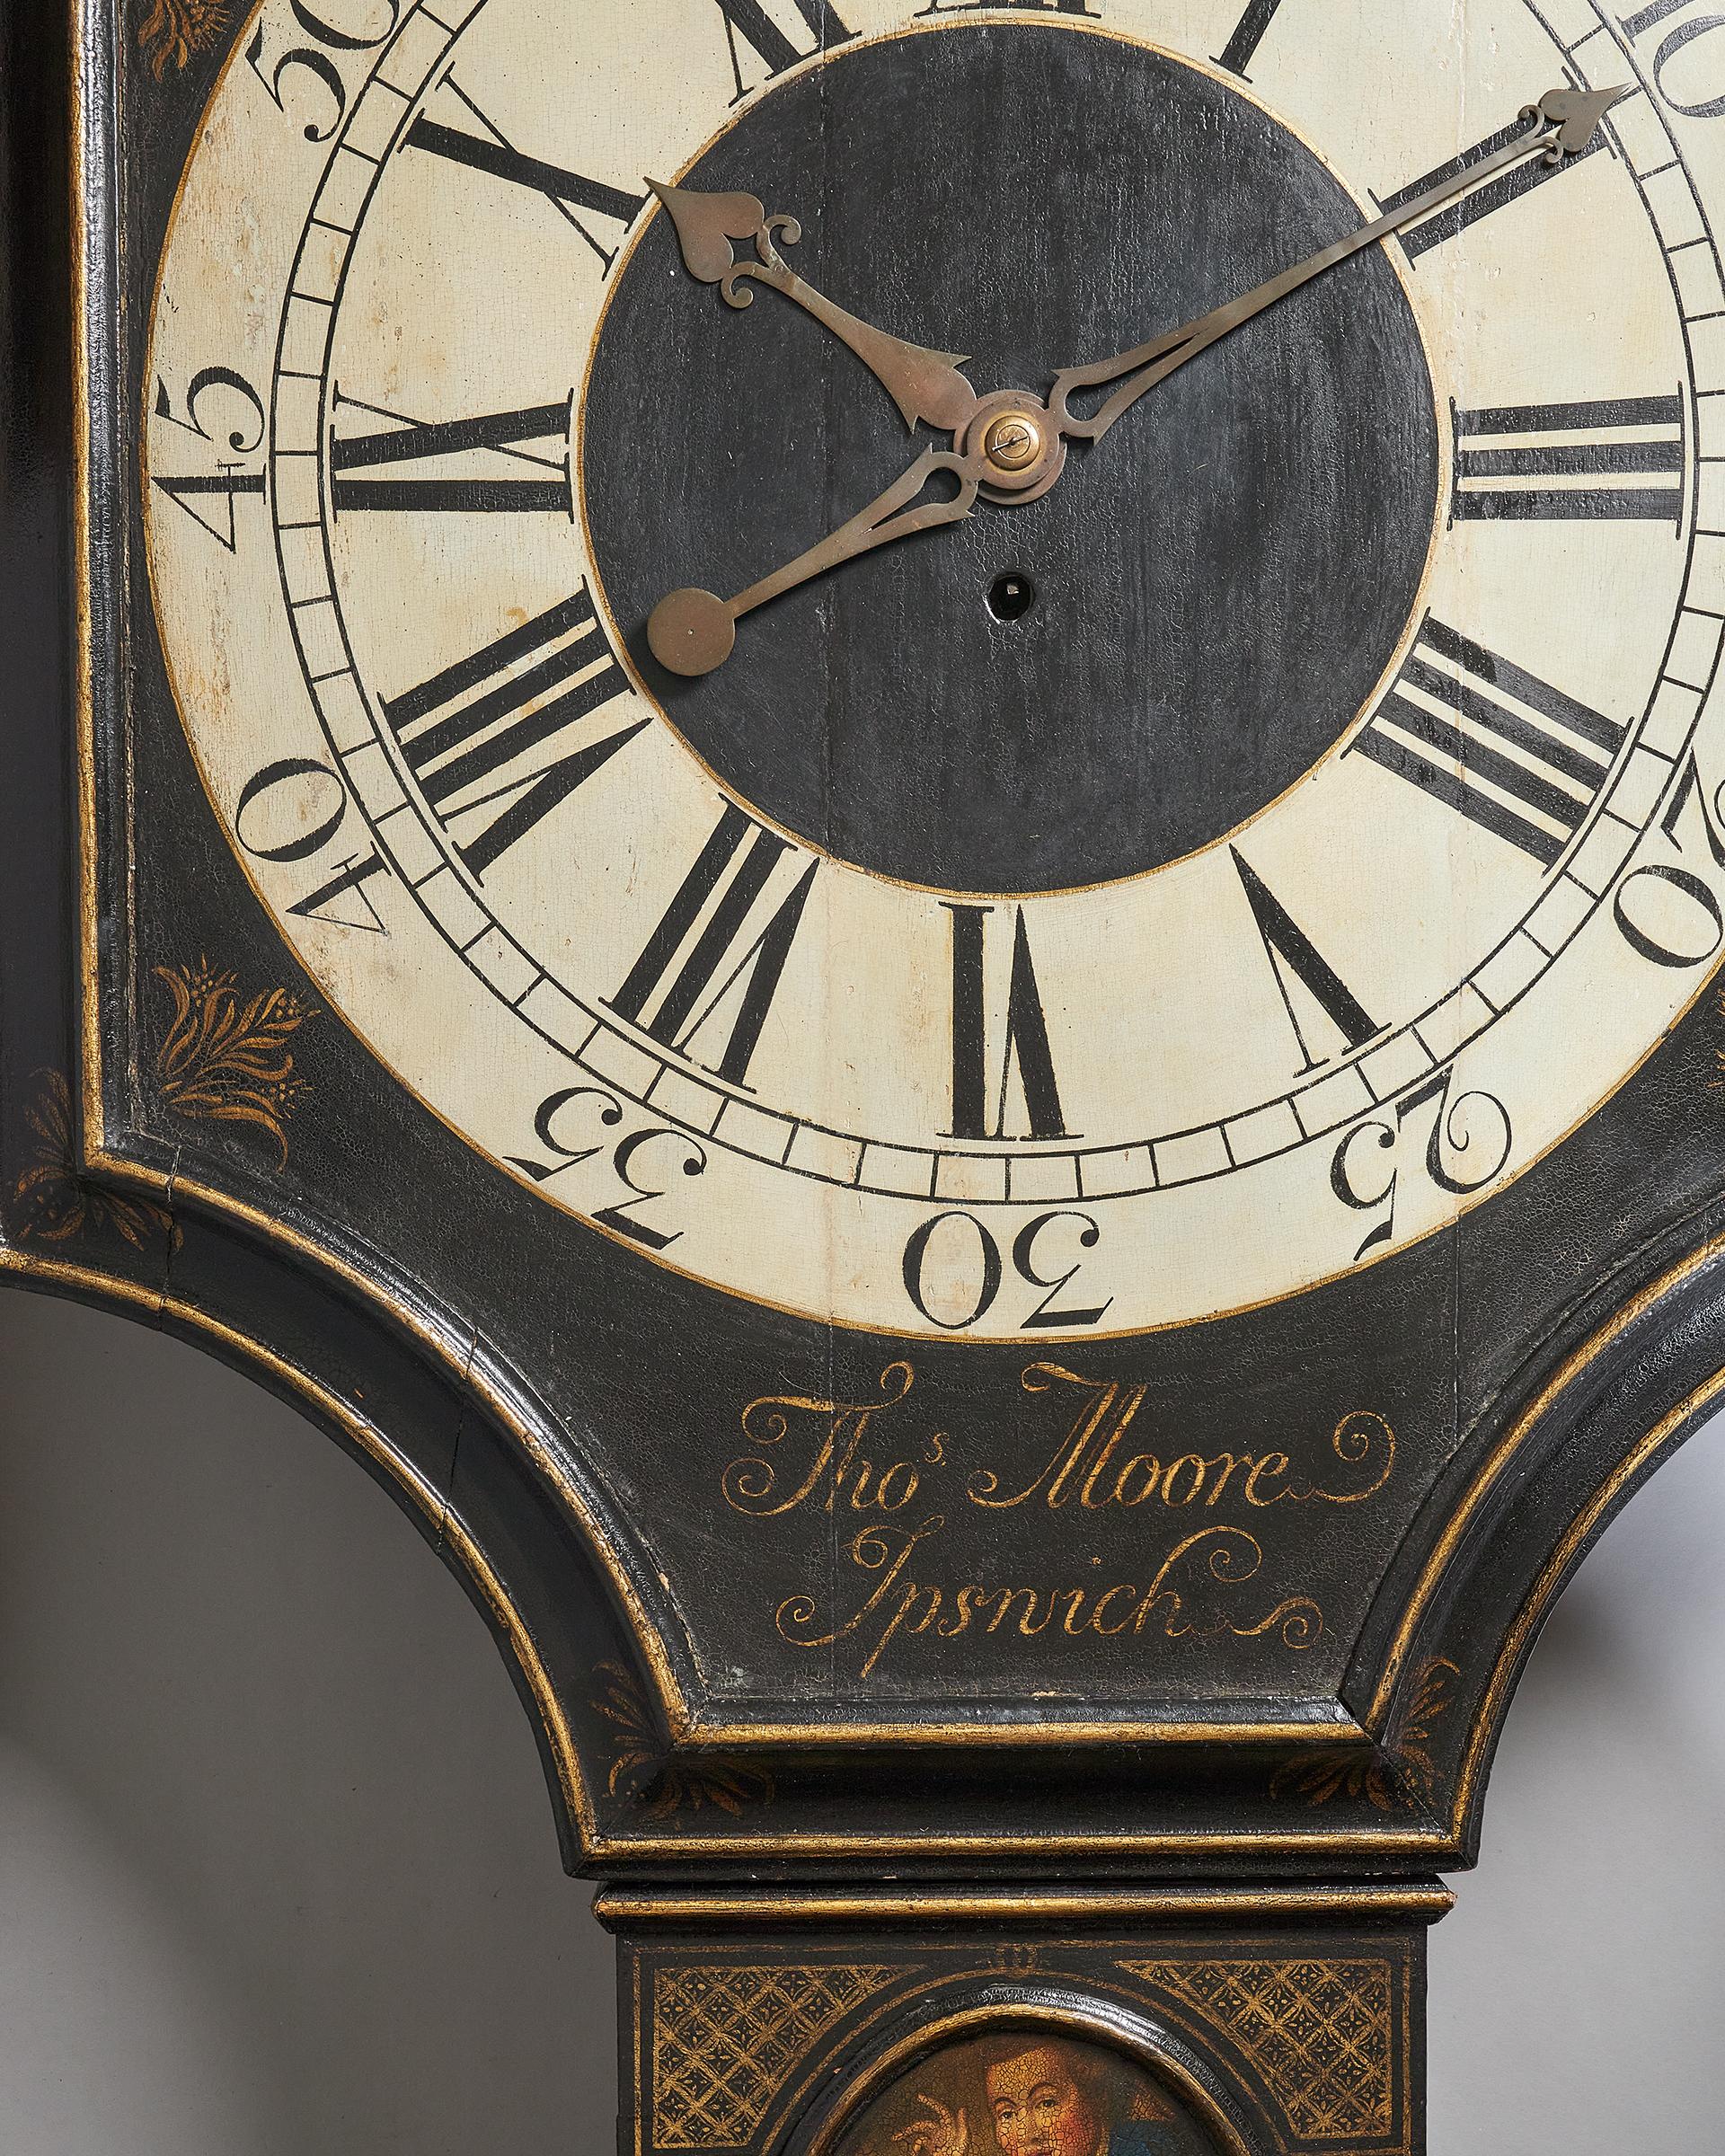 Tavern clock by Thomas Moore Ipswich

A fine eighteenth-century tavern clock with a japanned shield dial and gilt decorations, signed at the bottom of the dial in gilt letters Thos Moore Ipswich, c. 1740. 

The black japanned case of traditional